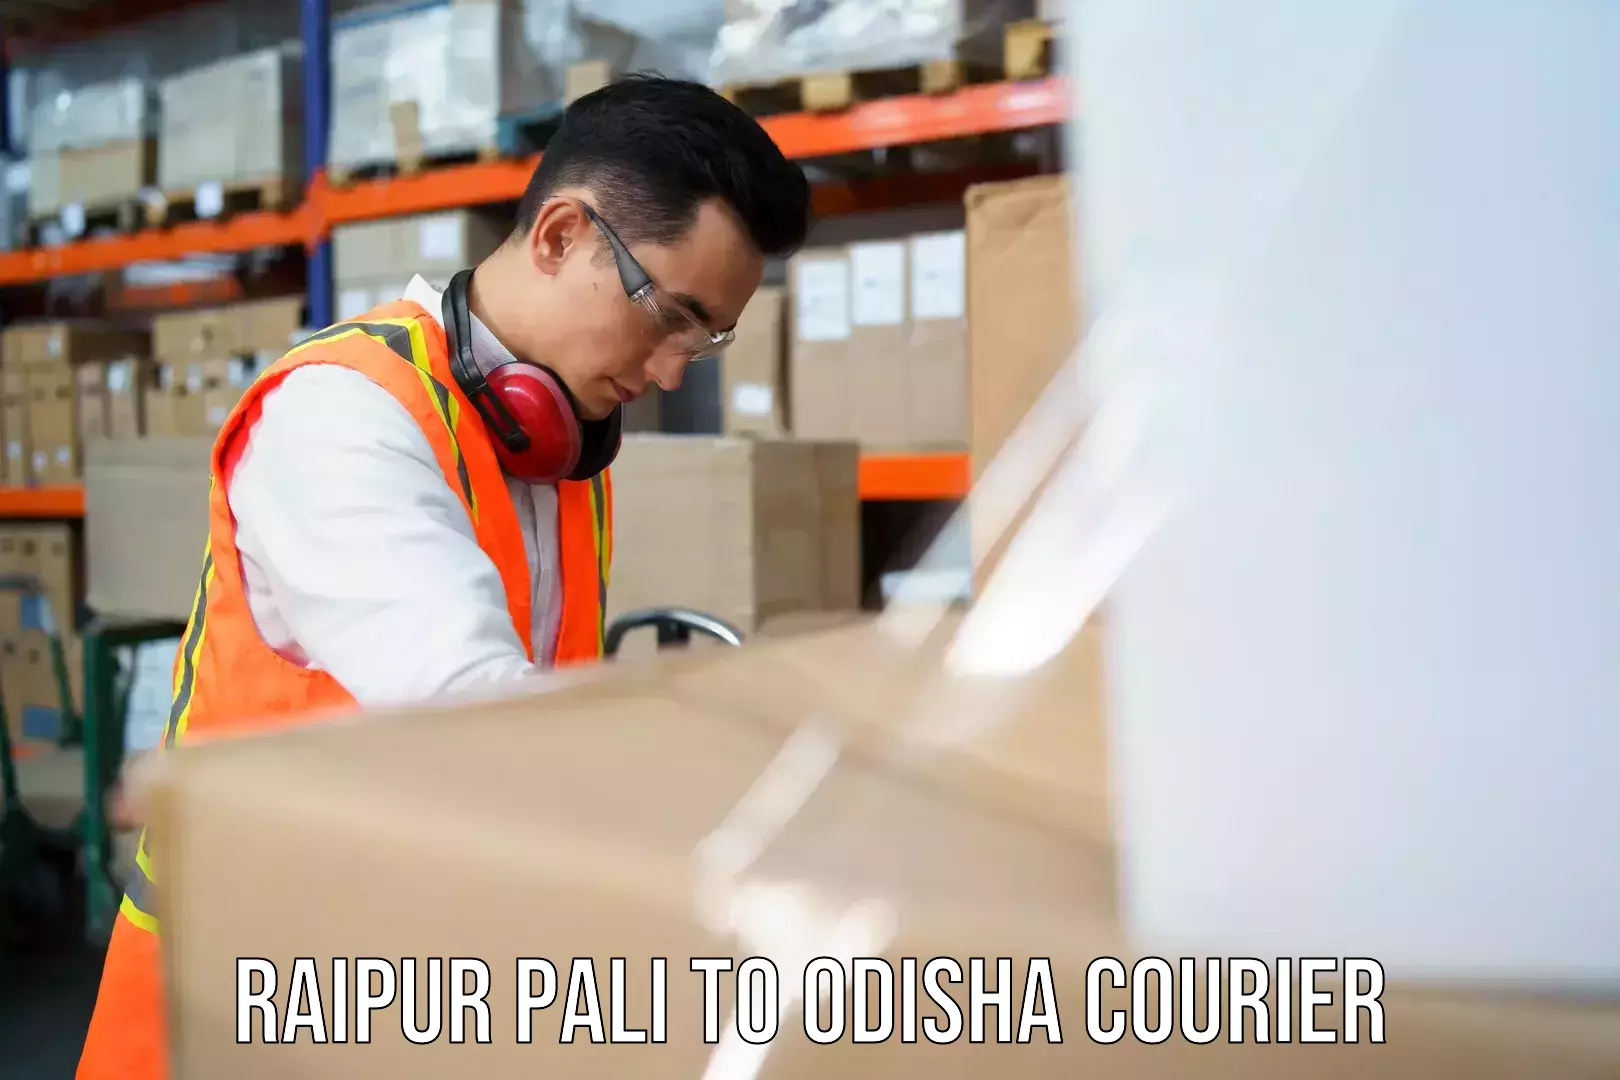 Easy access courier services Raipur Pali to Odisha